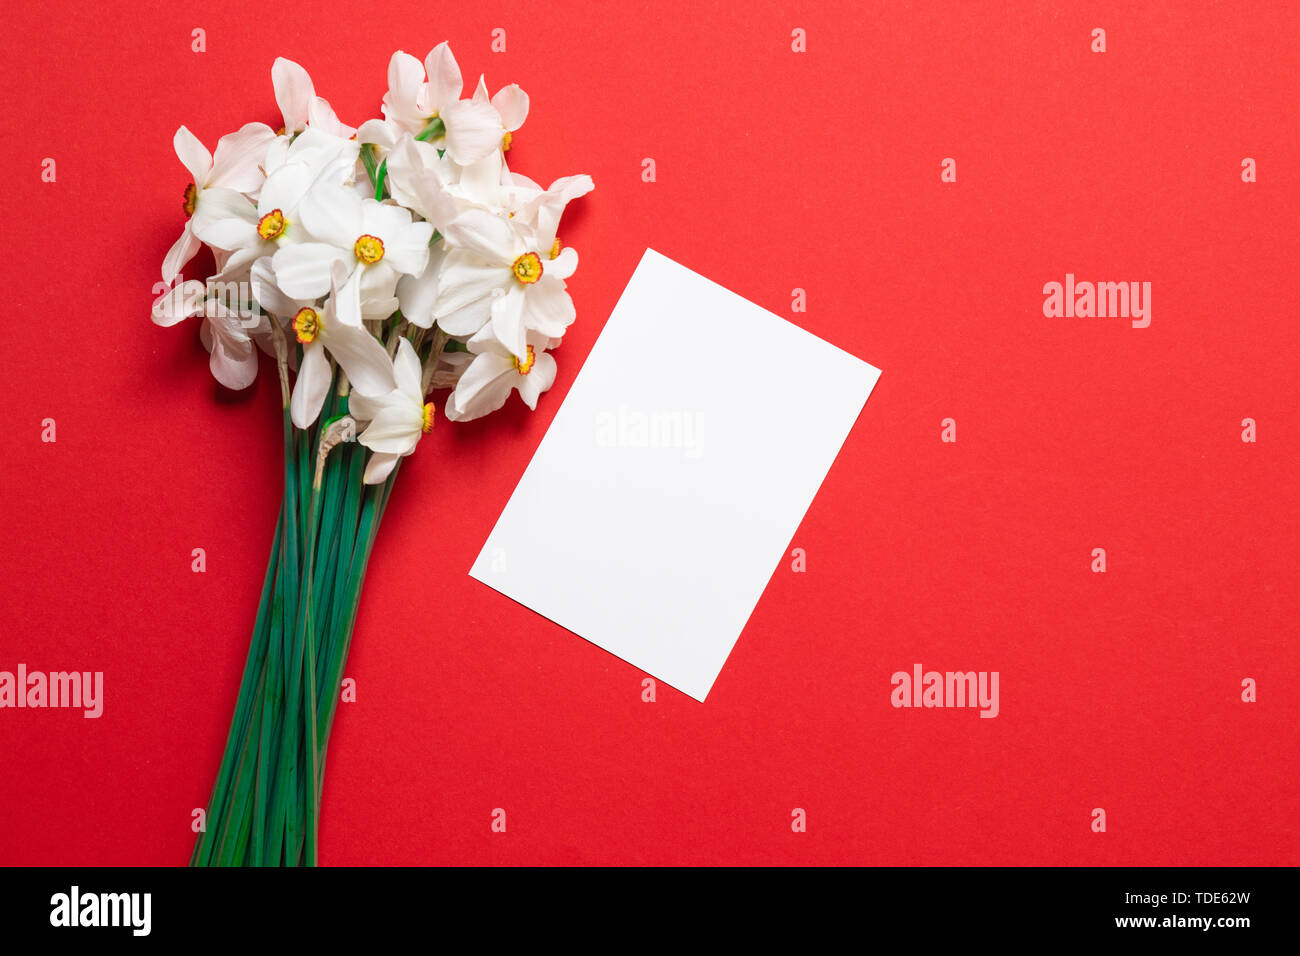 Fresh white daffodils flowers with white mockup A5 paper on a red background for the congratulations of women, moms and daughters. Stock Photo